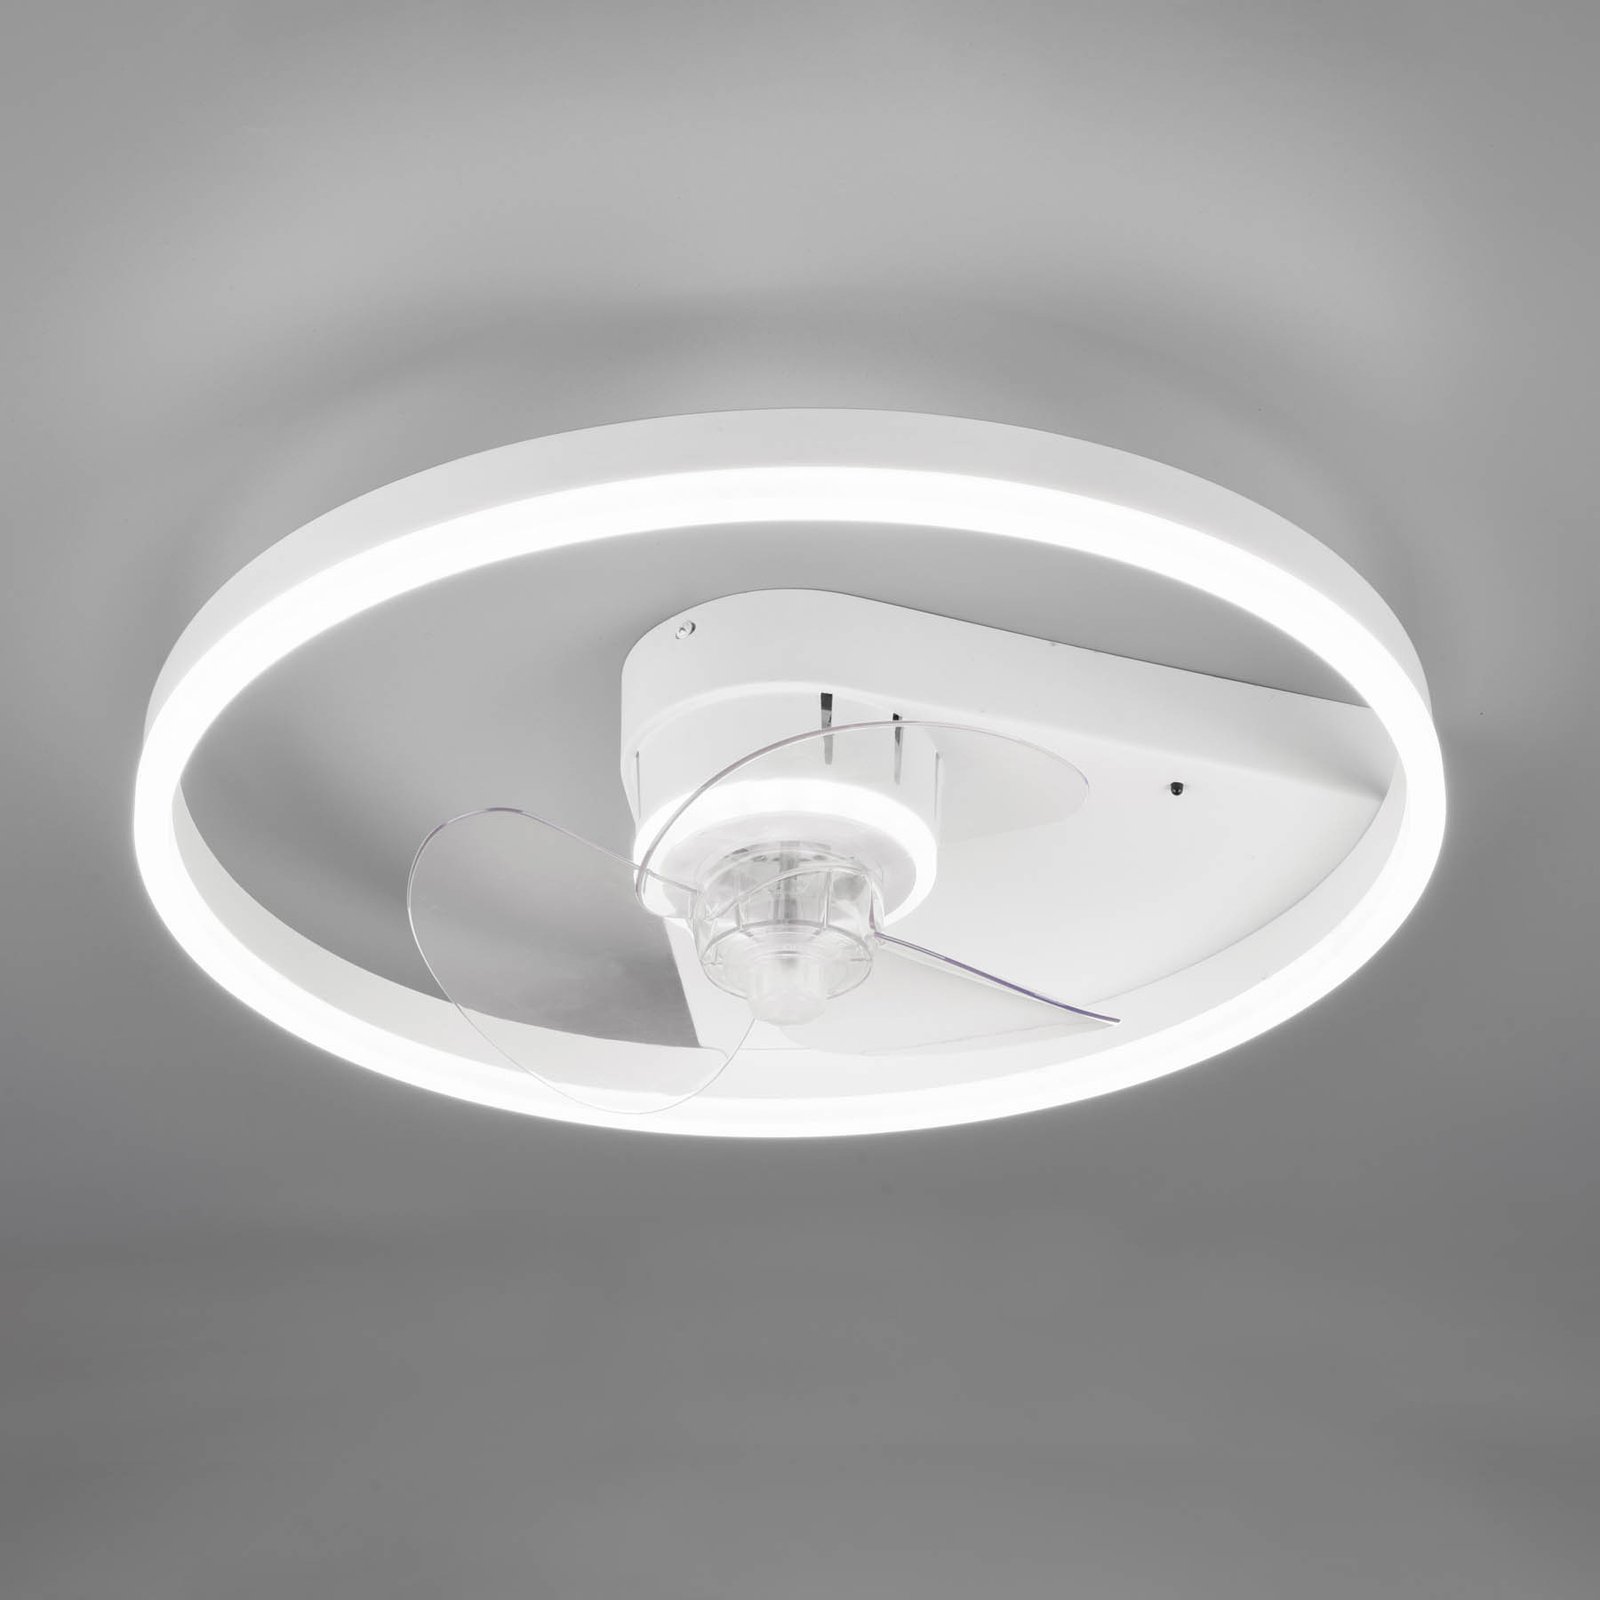 Borgholm ceiling fan with LEDs, CCT white